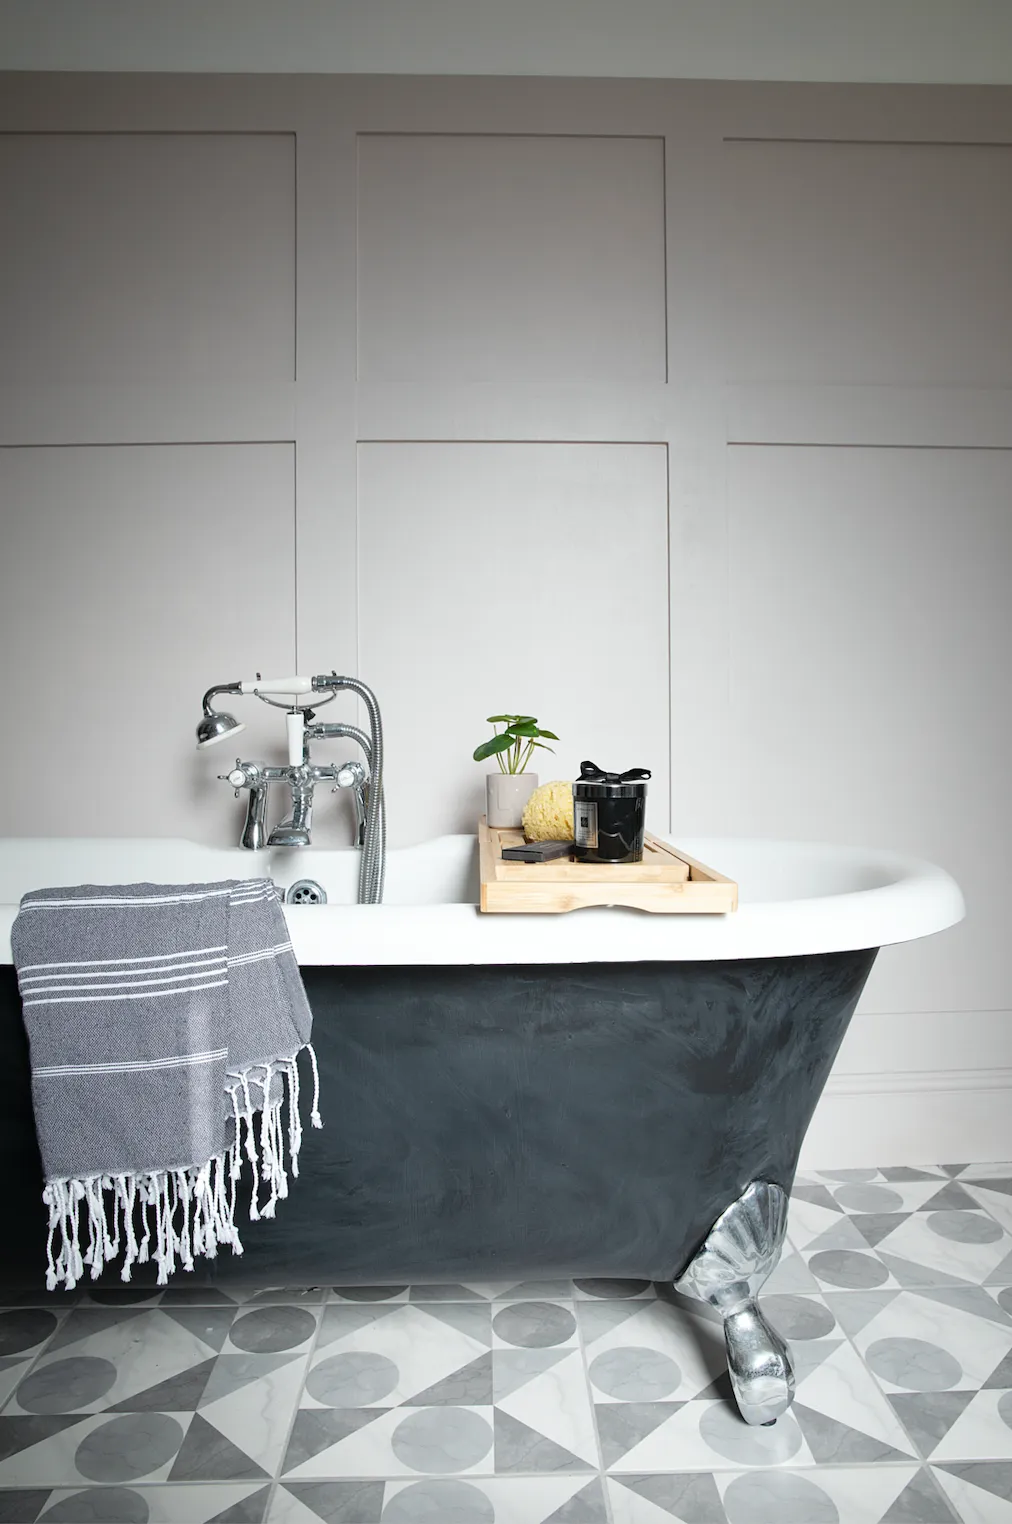 An acrylic freestanding bath is a practical choice as it’s lightweight and a lot cheaper than a cast iron design. After buying it on Instagram for £50, Cherelle spray-painted it black to match the other elements